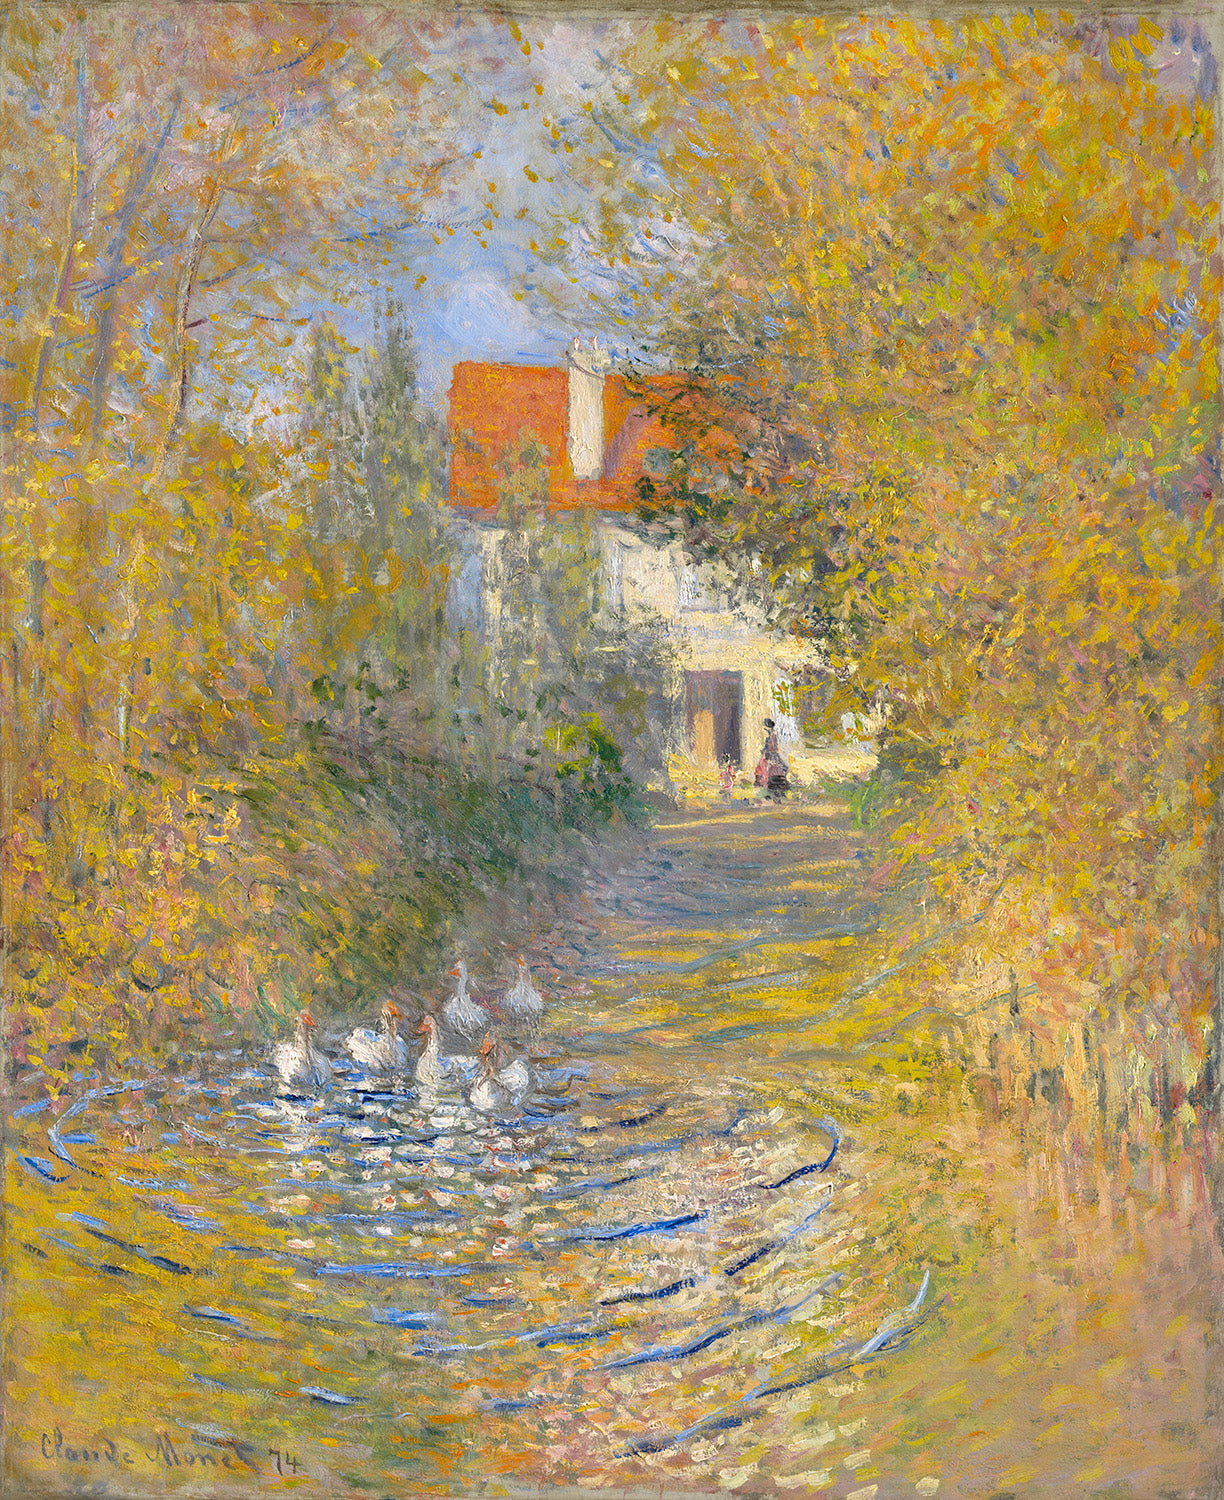 The Geese by Claude Monet